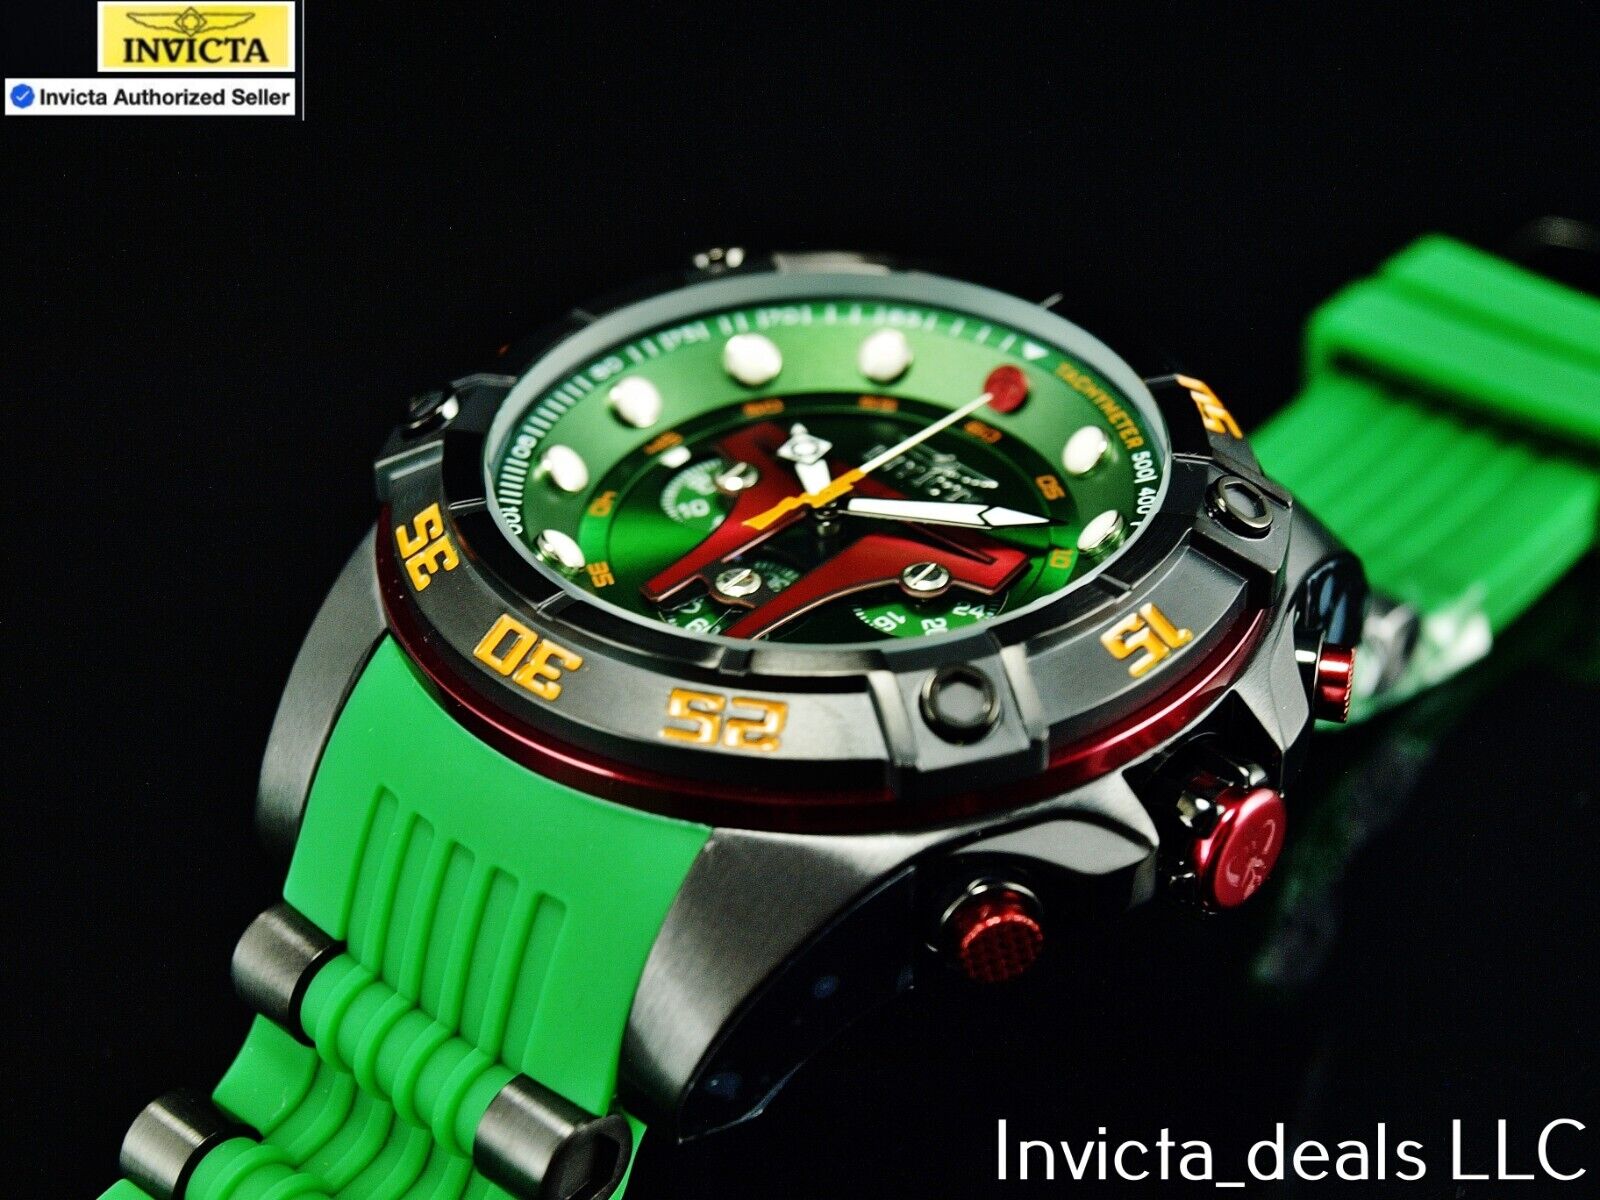 Watch+Invicta+INV40084+Star+Wars+Man+52mm+Stainless+steel for sale